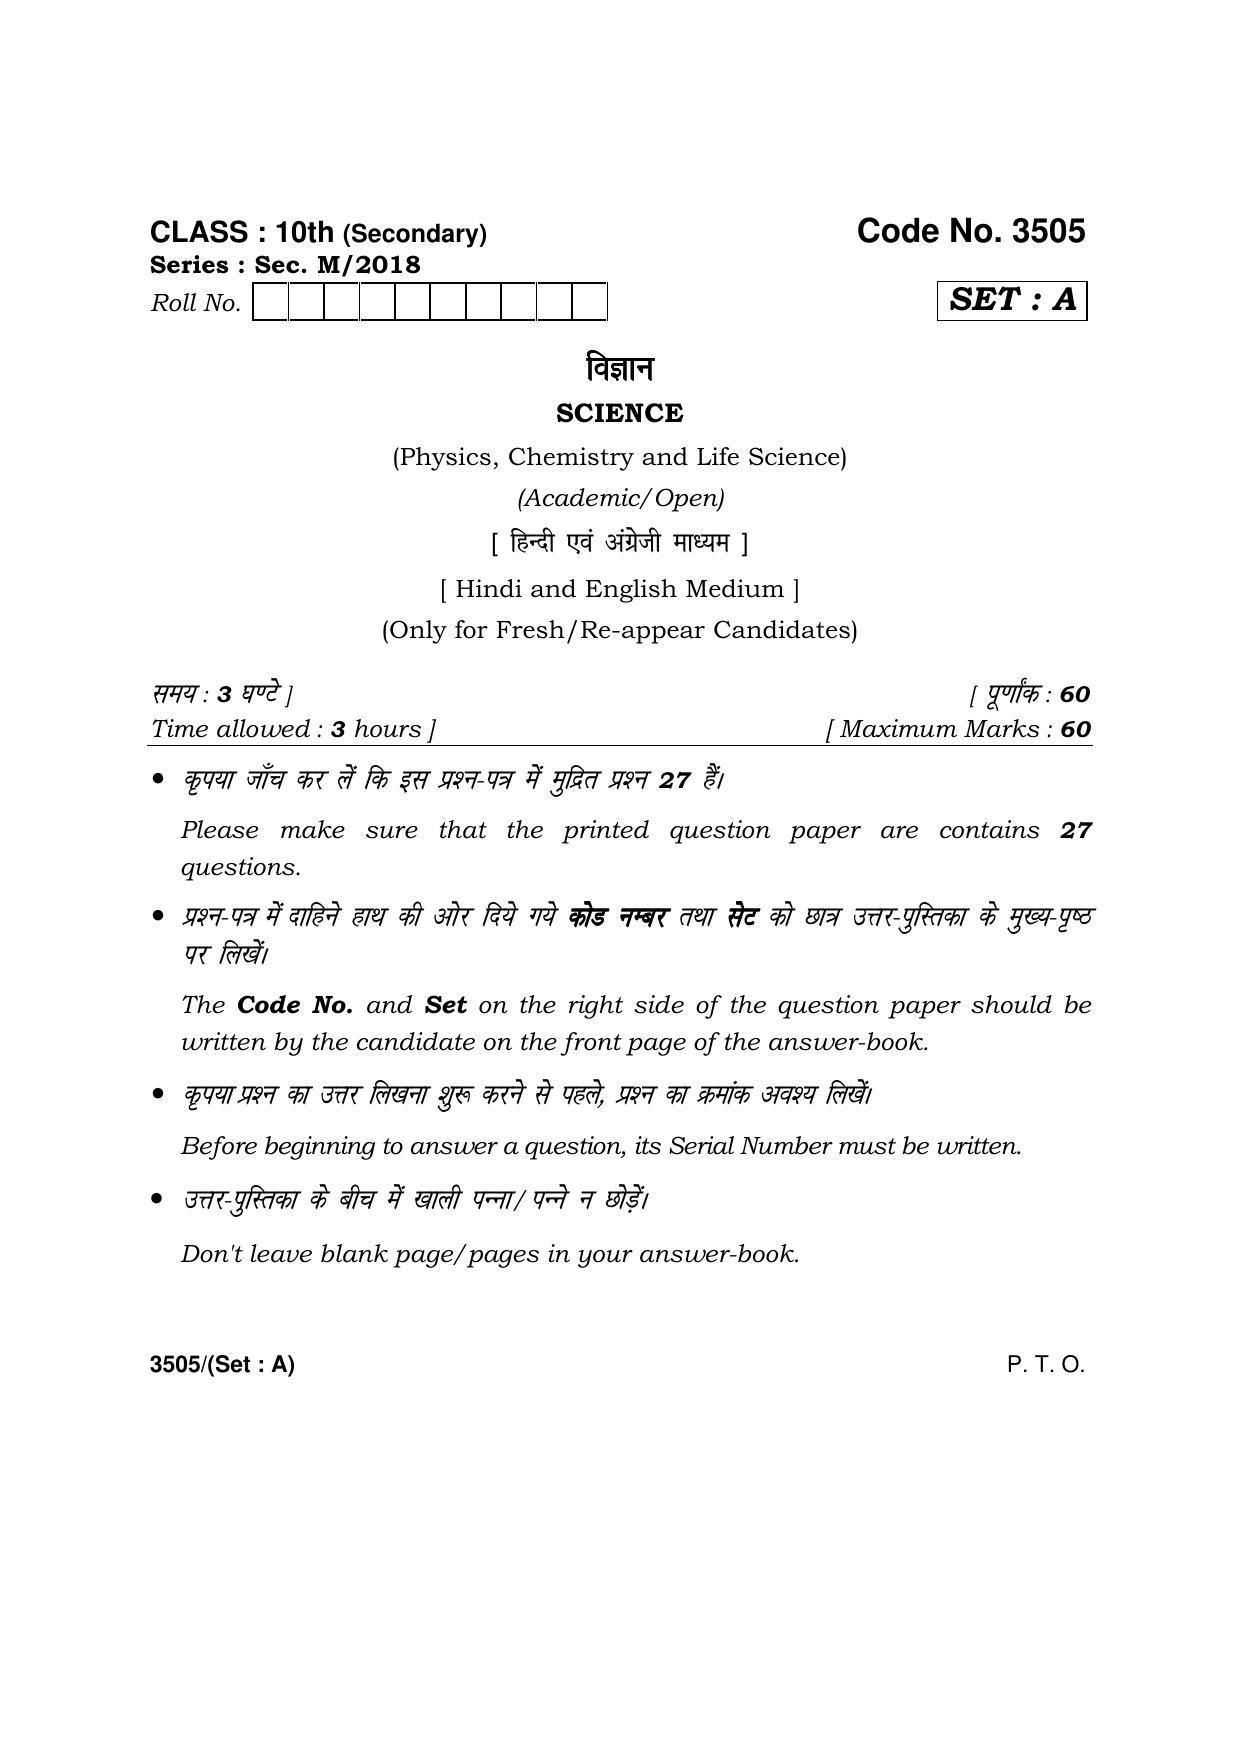 Haryana Board HBSE Class 10 Science -A 2018 Question Paper - Page 1